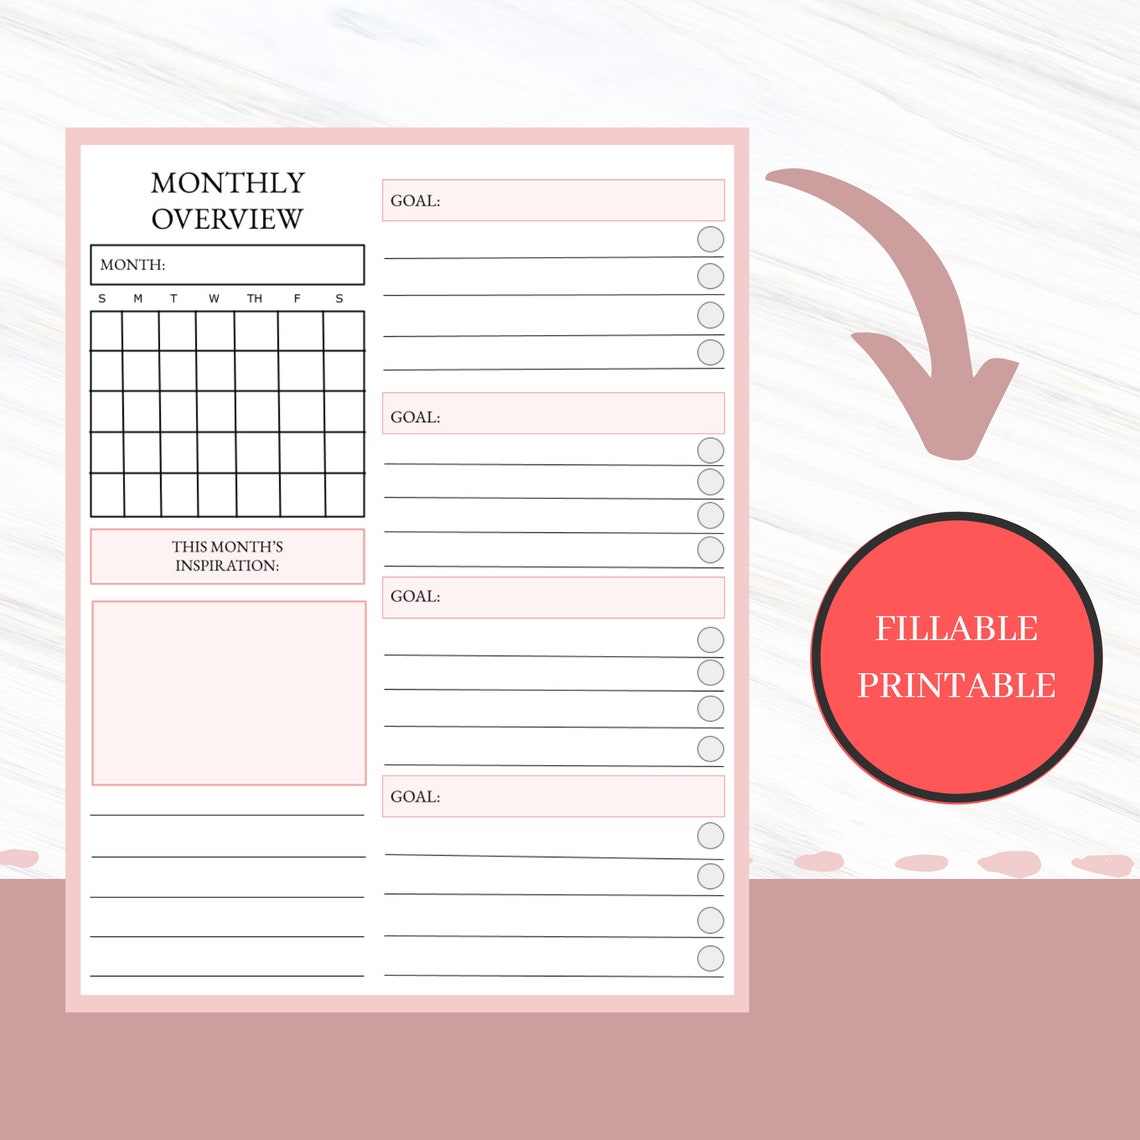 Monthly Overview Printable Planner Monthly Calendar PDF Goal | Etsy